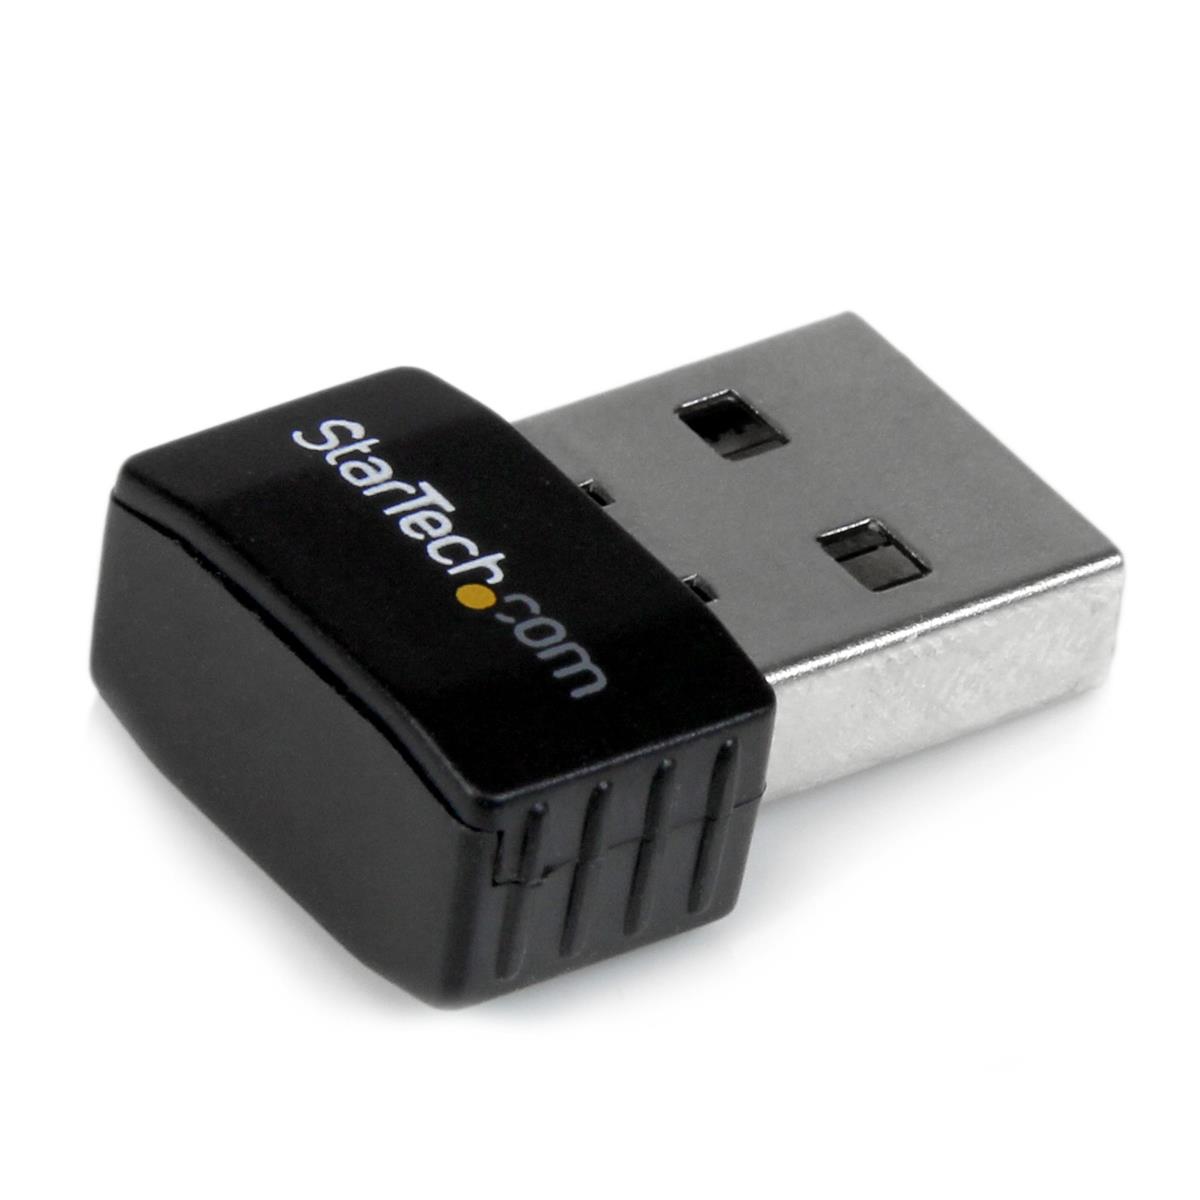 Image of StarTech USB 2.0 300Mbps Mini Wireless-N Network Adapter